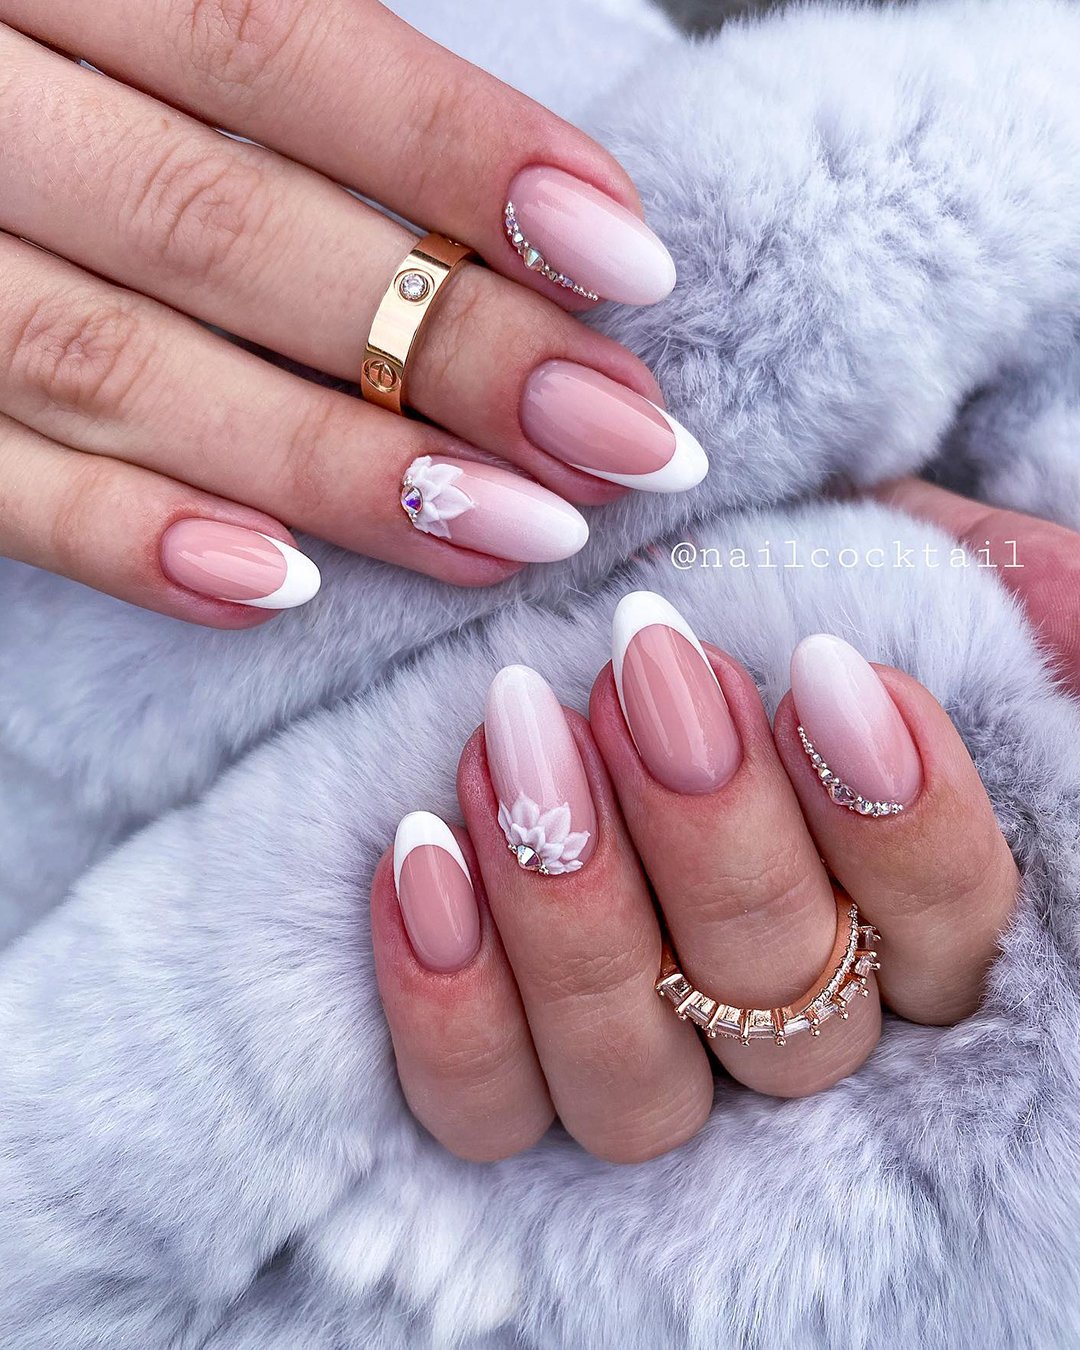 pink and white nails wedding elegant french with rhinestones and flowers nailcocktail